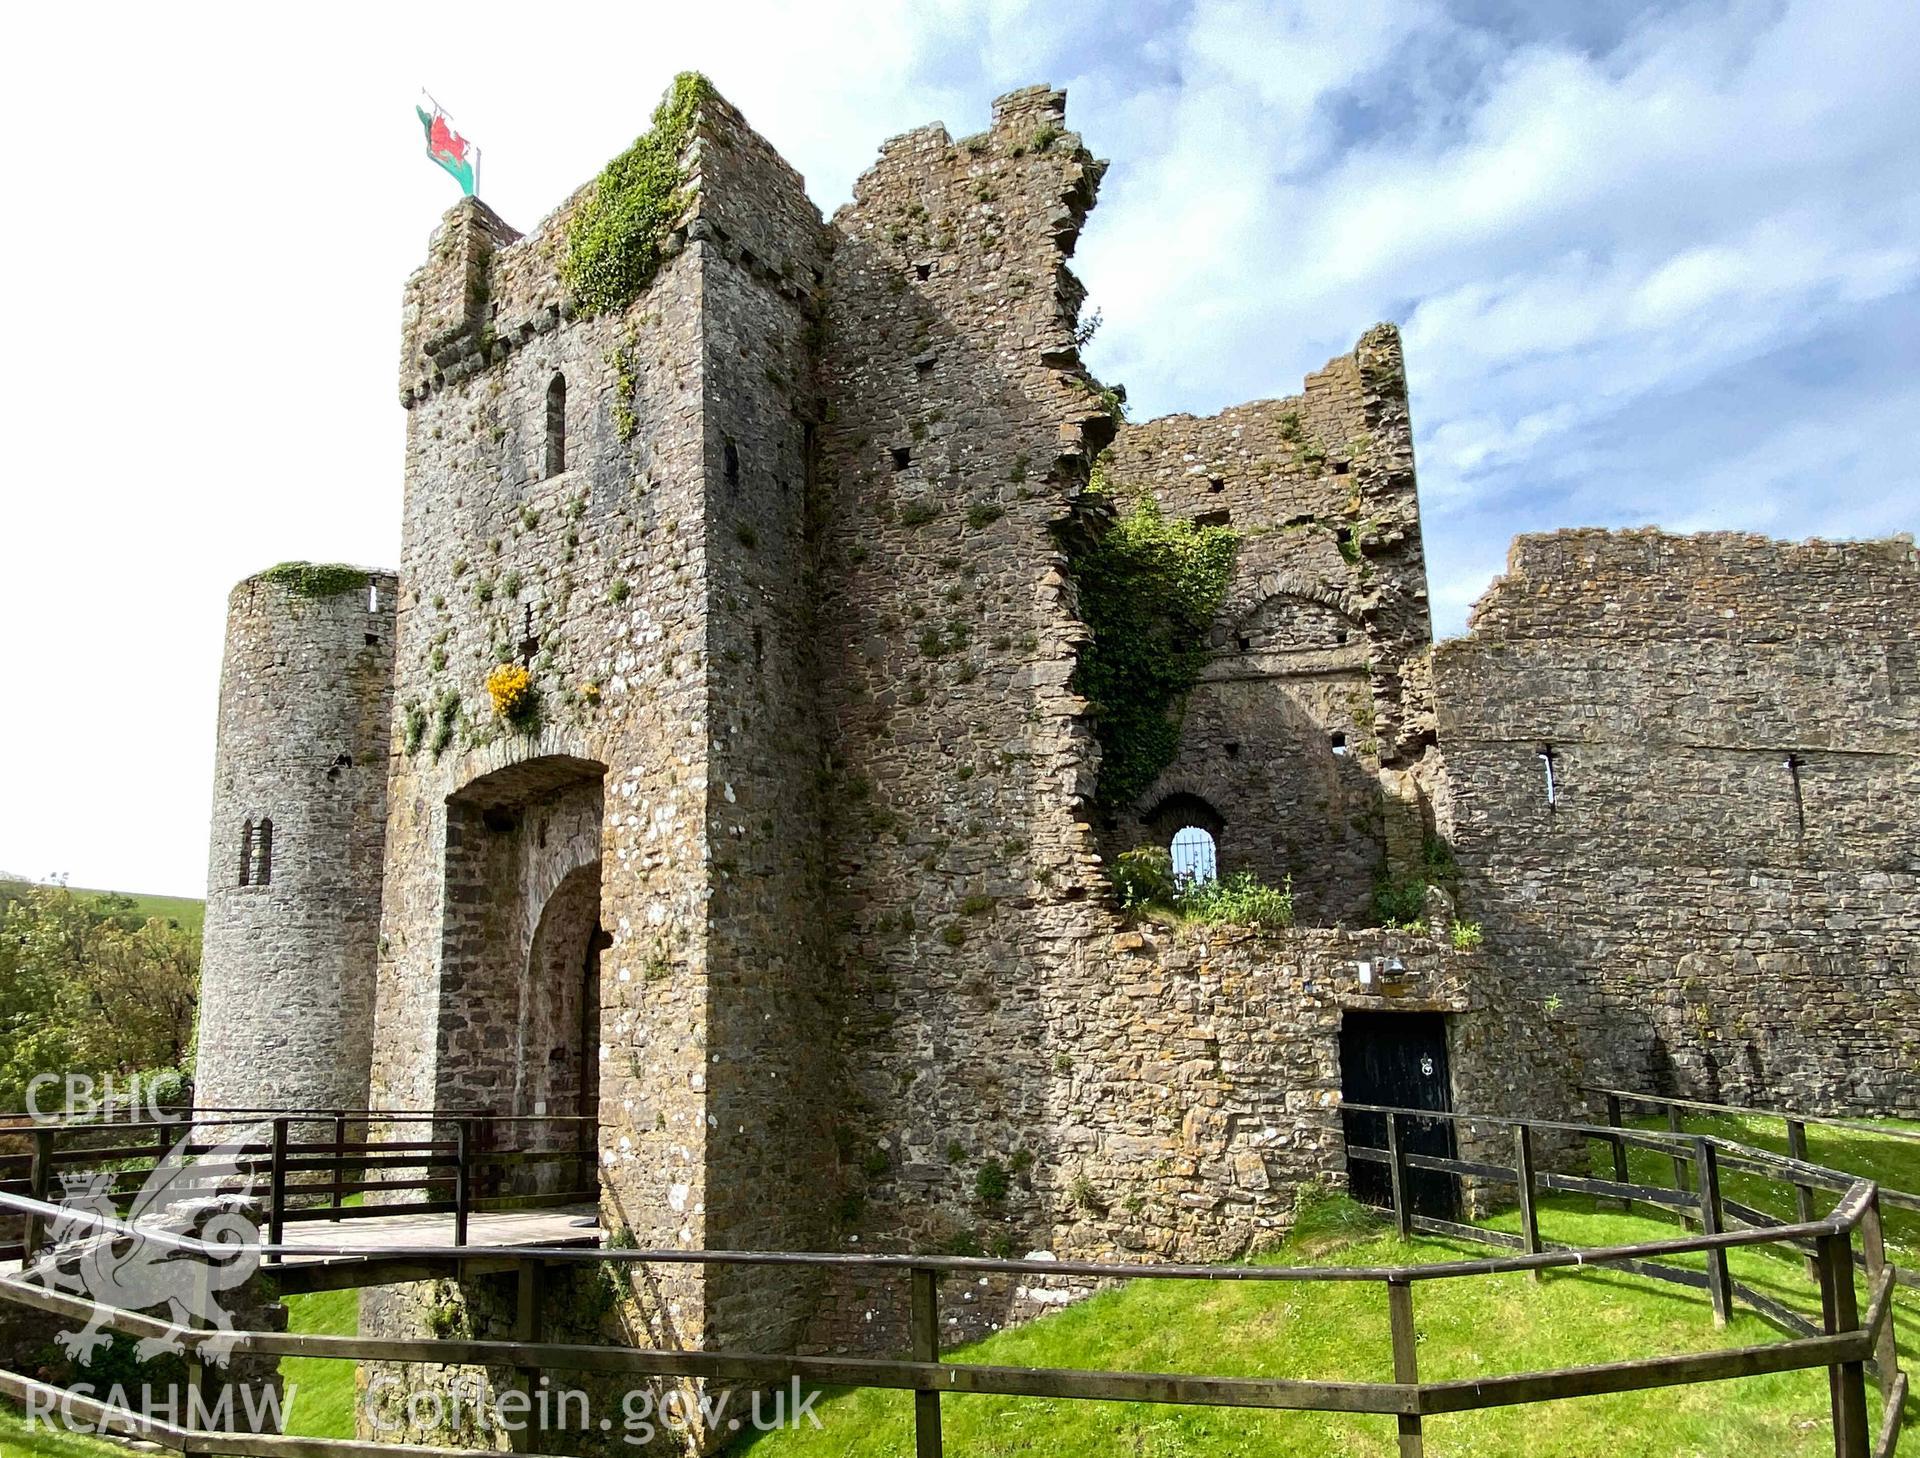 Digital photograph showing exterior of Manorbier Castle, produced by Paul Davis in 2023